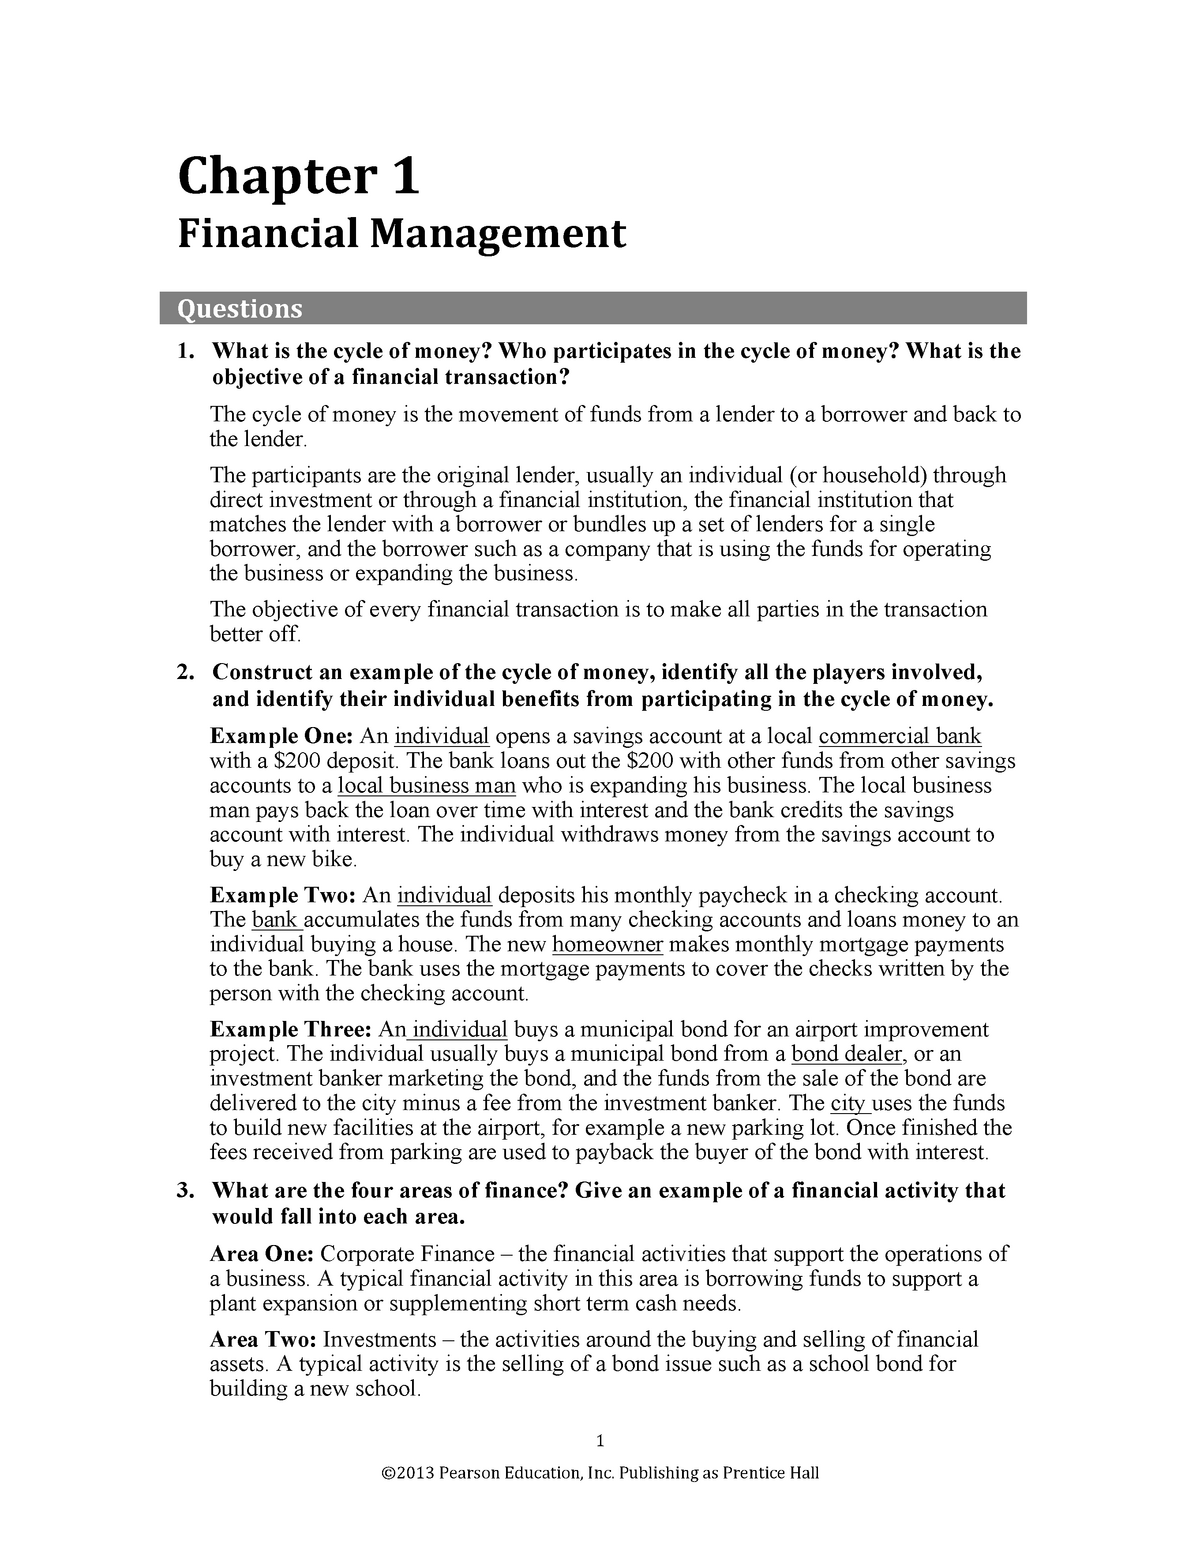 thesis of financial management